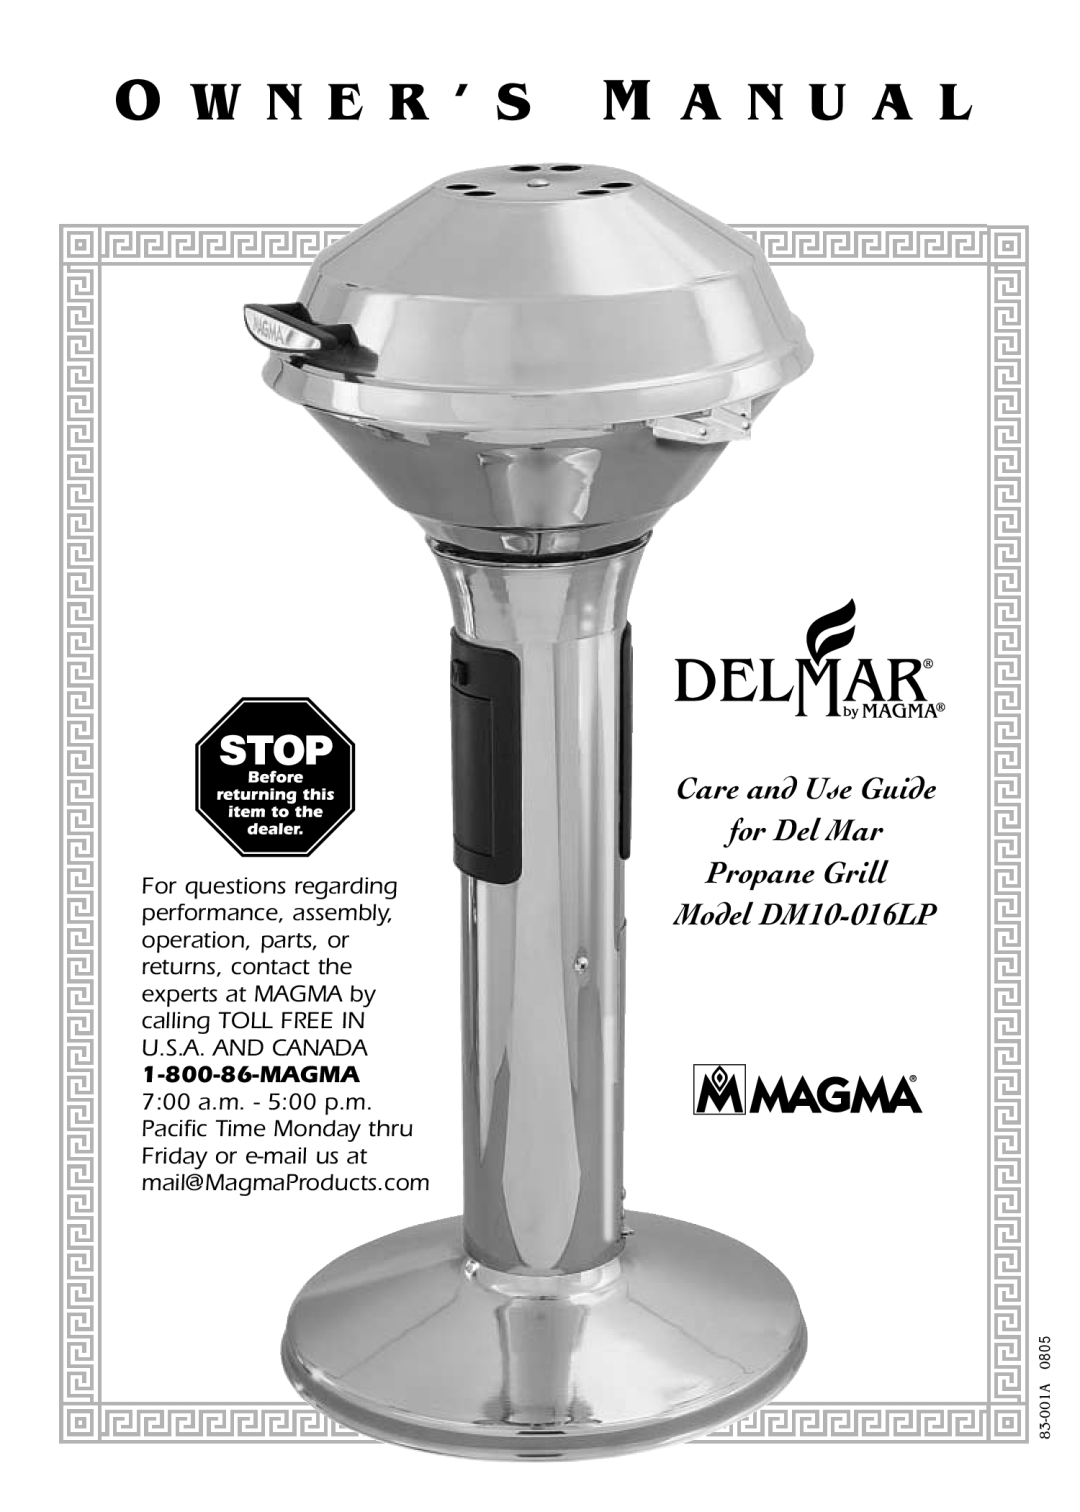 Magma owner manual O W N E R ’ S M A N U A L, Care and Use Guide for Del Mar Propane Grill Model DM10-016LP, 83-001A 